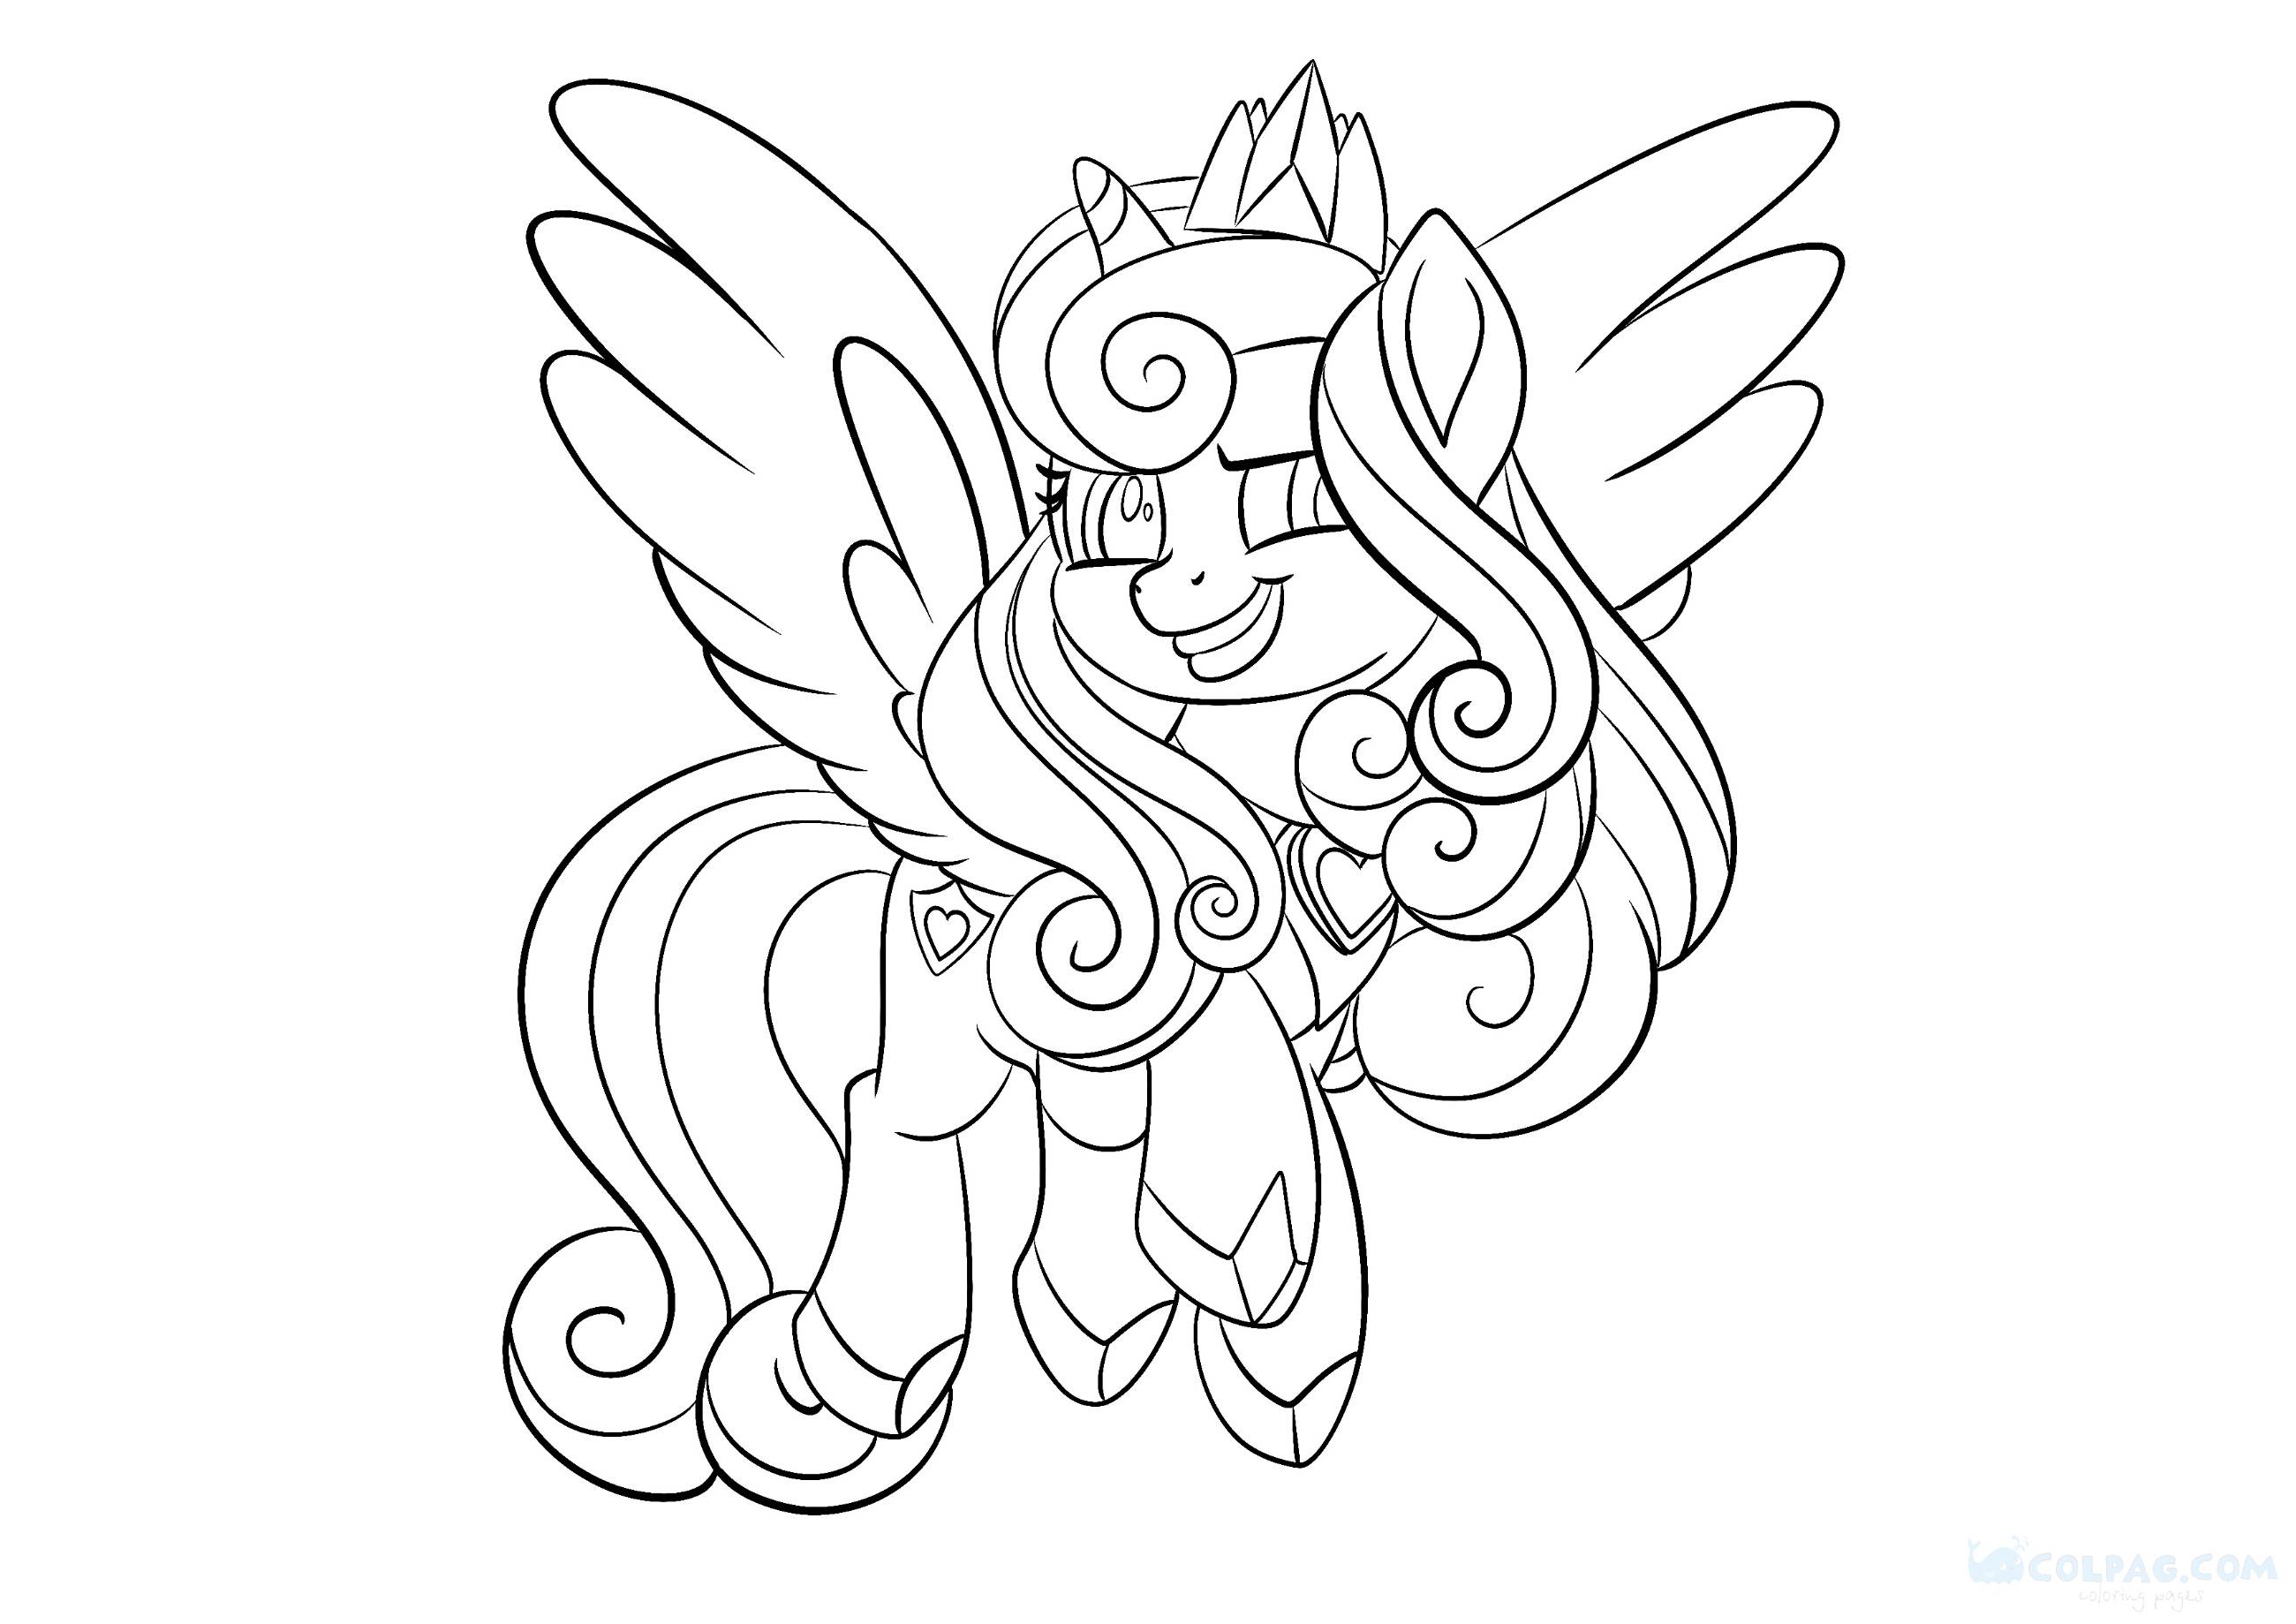 Princess Cadence Coloring Pages (My Little Pony)